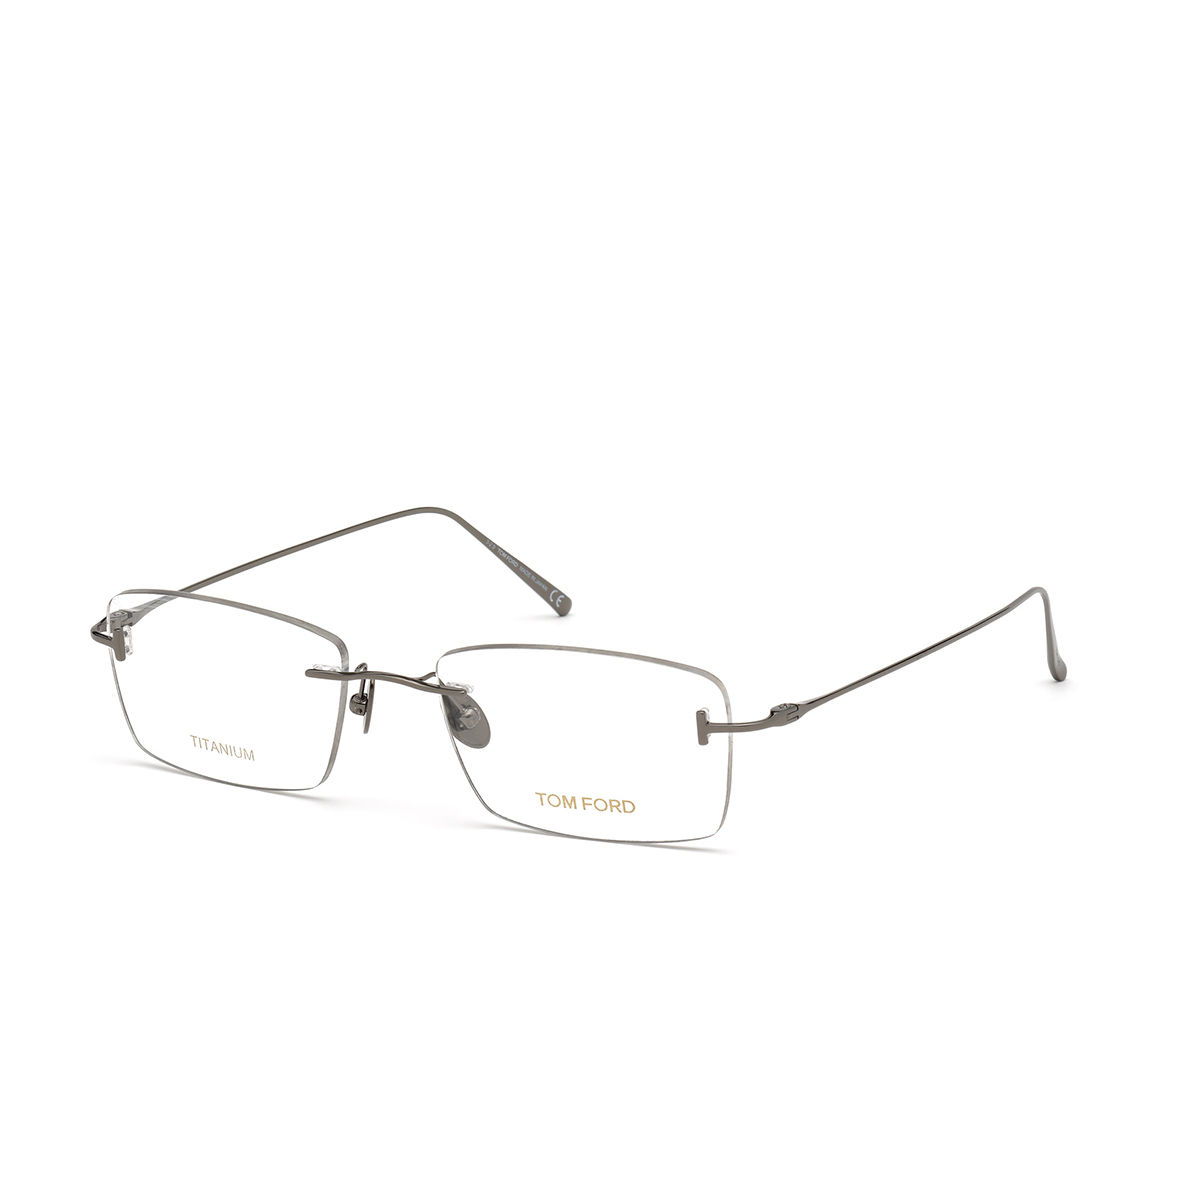 Tom Ford Sunglasses Grey Metal Eyeglasses FT5678 54 008: Buy Tom Ford  Sunglasses Grey Metal Eyeglasses FT5678 54 008 Online at Best Price in  India | Nykaa